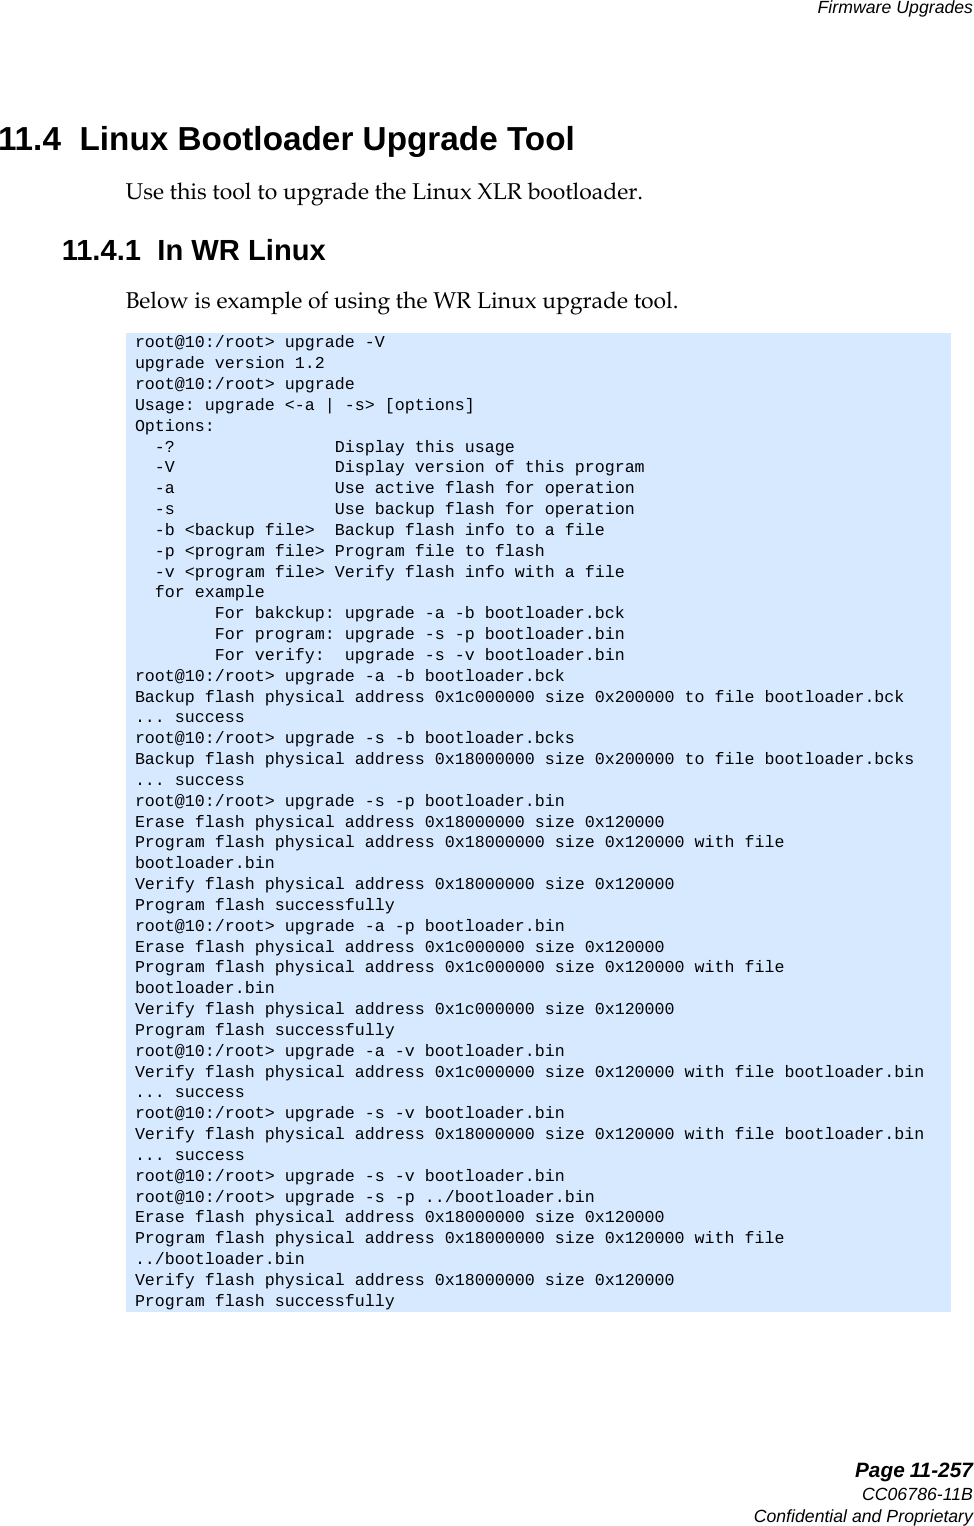   Page 11-257CC06786-11BConfidential and ProprietaryFirmware Upgrades14ABABPreliminary11.4  Linux Bootloader Upgrade ToolUse this tool to upgrade the Linux XLR bootloader.11.4.1  In WR LinuxBelow is example of using the WR Linux upgrade tool.root@10:/root&gt; upgrade -Vupgrade version 1.2root@10:/root&gt; upgrade     Usage: upgrade &lt;-a | -s&gt; [options] Options:  -?                Display this usage  -V                Display version of this program  -a                Use active flash for operation  -s                Use backup flash for operation  -b &lt;backup file&gt;  Backup flash info to a file  -p &lt;program file&gt; Program file to flash  -v &lt;program file&gt; Verify flash info with a file  for example        For bakckup: upgrade -a -b bootloader.bck        For program: upgrade -s -p bootloader.bin        For verify:  upgrade -s -v bootloader.binroot@10:/root&gt; upgrade -a -b bootloader.bckBackup flash physical address 0x1c000000 size 0x200000 to file bootloader.bck... successroot@10:/root&gt; upgrade -s -b bootloader.bcksBackup flash physical address 0x18000000 size 0x200000 to file bootloader.bcks... successroot@10:/root&gt; upgrade -s -p bootloader.bin Erase flash physical address 0x18000000 size 0x120000Program flash physical address 0x18000000 size 0x120000 with filebootloader.binVerify flash physical address 0x18000000 size 0x120000Program flash successfullyroot@10:/root&gt; upgrade -a -p bootloader.binErase flash physical address 0x1c000000 size 0x120000Program flash physical address 0x1c000000 size 0x120000 with filebootloader.binVerify flash physical address 0x1c000000 size 0x120000Program flash successfullyroot@10:/root&gt; upgrade -a -v bootloader.binVerify flash physical address 0x1c000000 size 0x120000 with file bootloader.bin... successroot@10:/root&gt; upgrade -s -v bootloader.binVerify flash physical address 0x18000000 size 0x120000 with file bootloader.bin... successroot@10:/root&gt; upgrade -s -v bootloader.binroot@10:/root&gt; upgrade -s -p ../bootloader.binErase flash physical address 0x18000000 size 0x120000Program flash physical address 0x18000000 size 0x120000 with file../bootloader.binVerify flash physical address 0x18000000 size 0x120000Program flash successfully